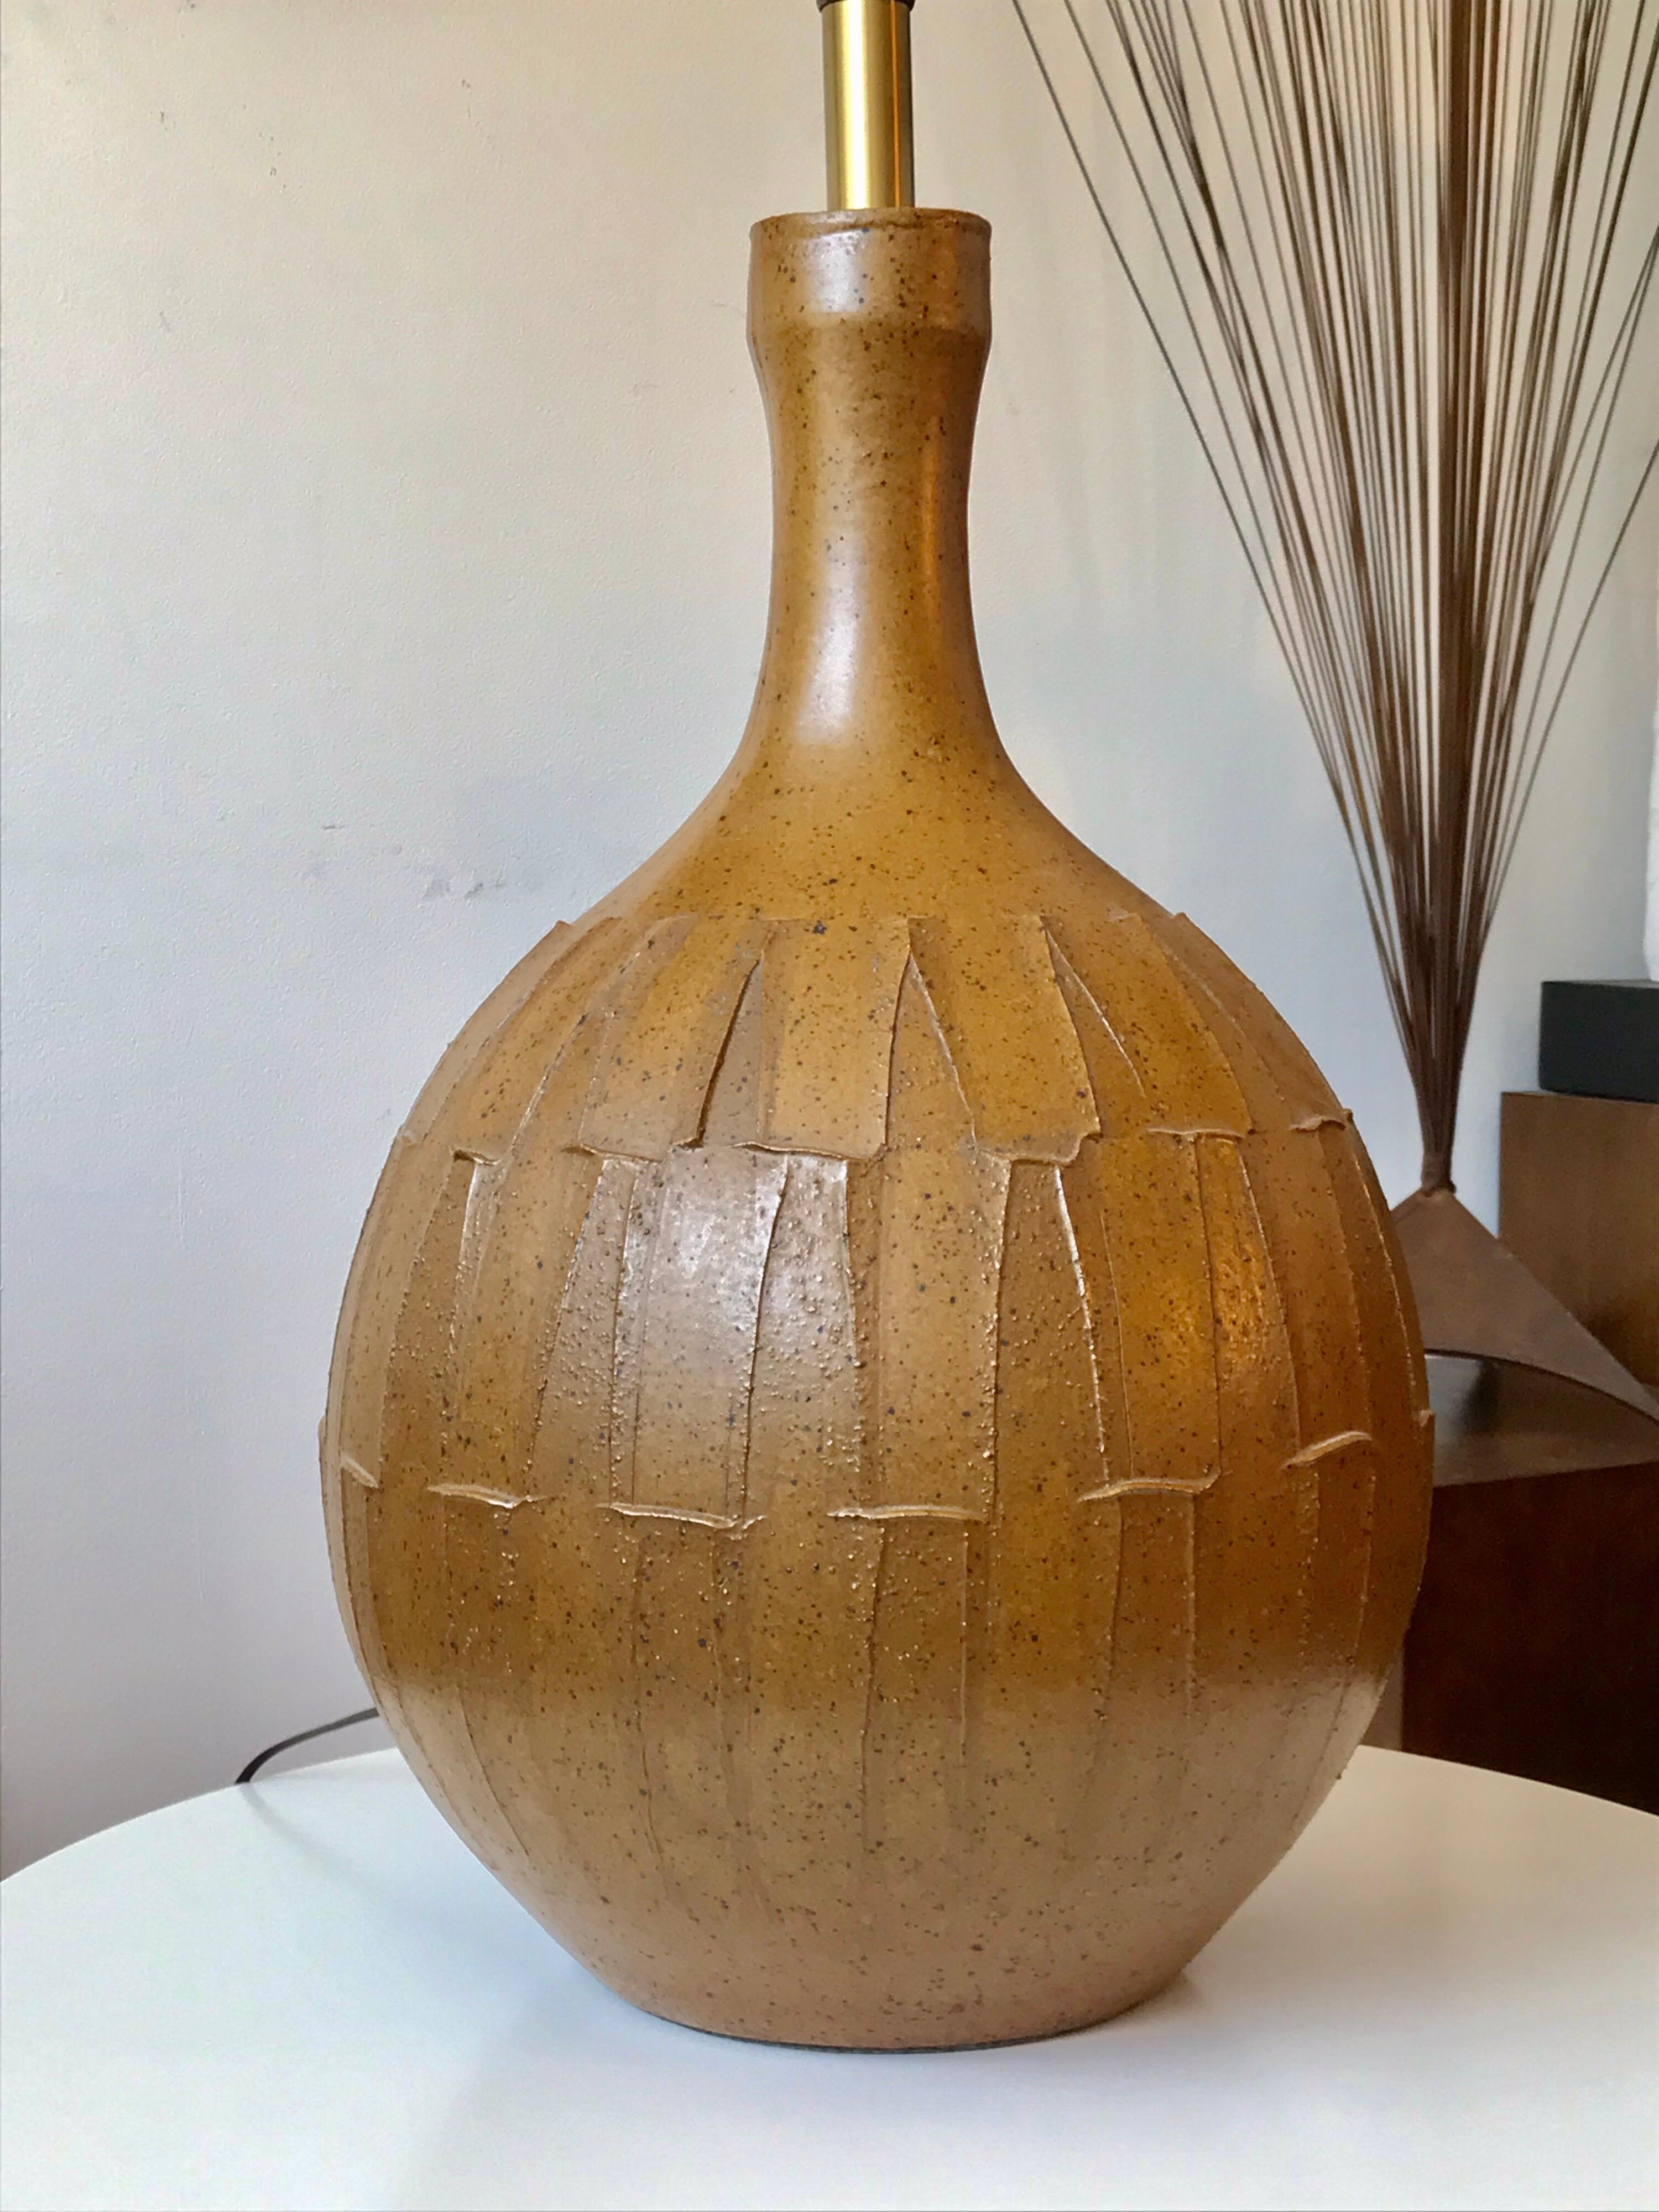 A great California design single lamp.
Made with Cressey's own formula clay, ocher glaze hue and hand applied 'Ribbed' texture / pattern.
It has the original vintage hardware and wiring.
